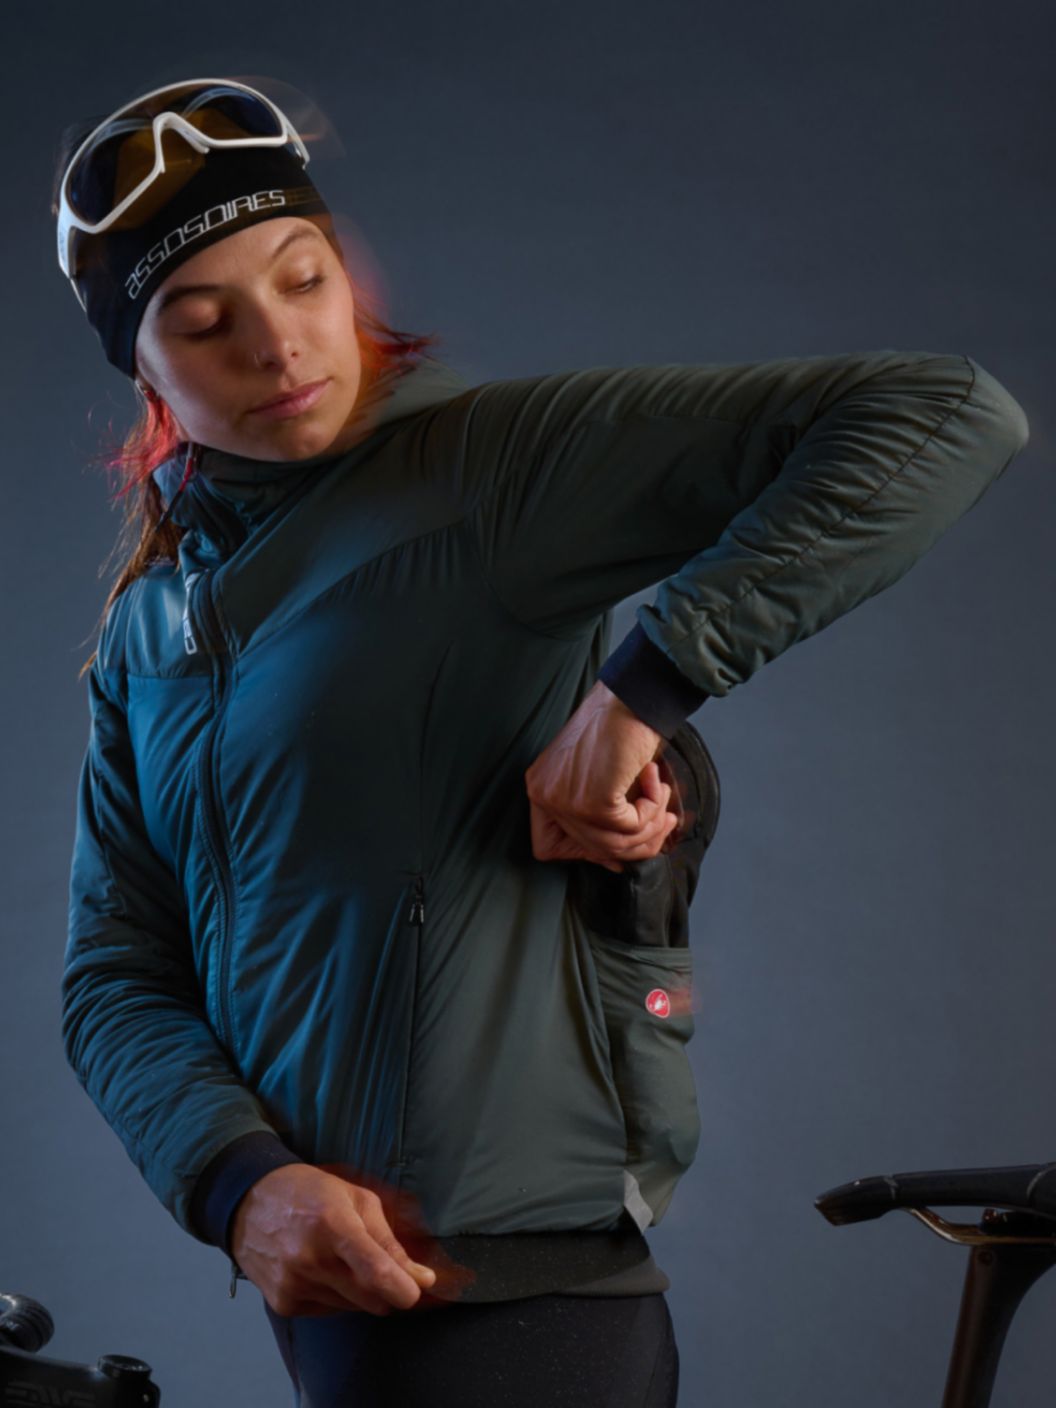 A glowy and slightly motion-blurred image of a road rider in heavy winter apparel standing while reaching for an additional clothing layer from their jacket pocket. 